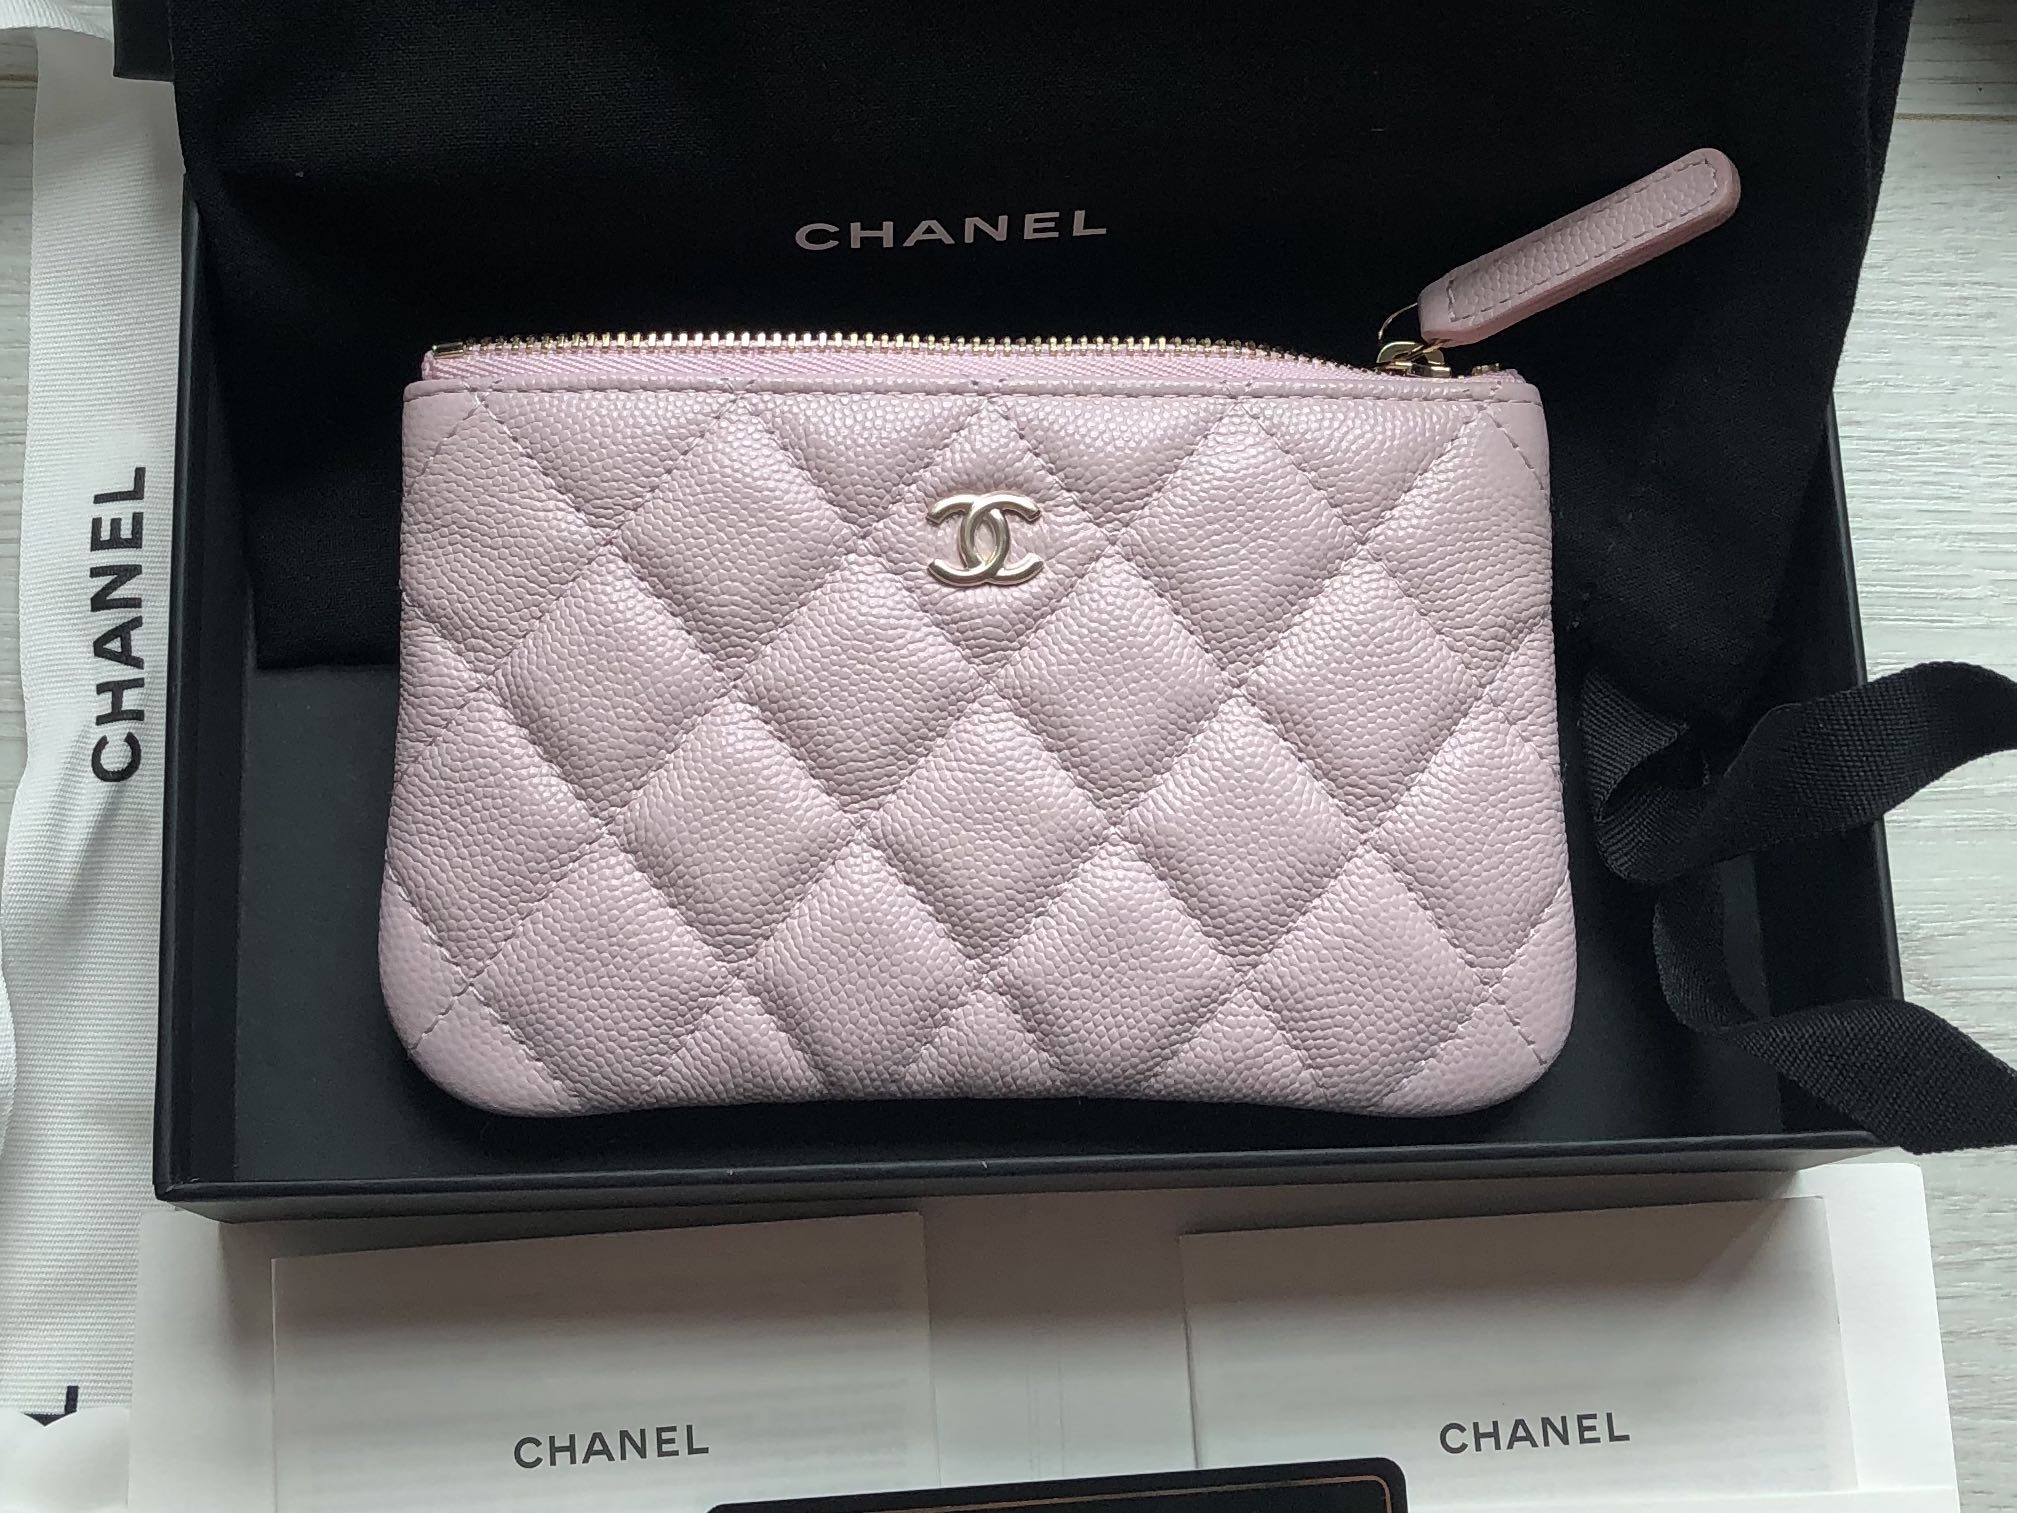 Chanel Small O-Case Leather Pouch - Pink Wallets, Accessories - CHA944006